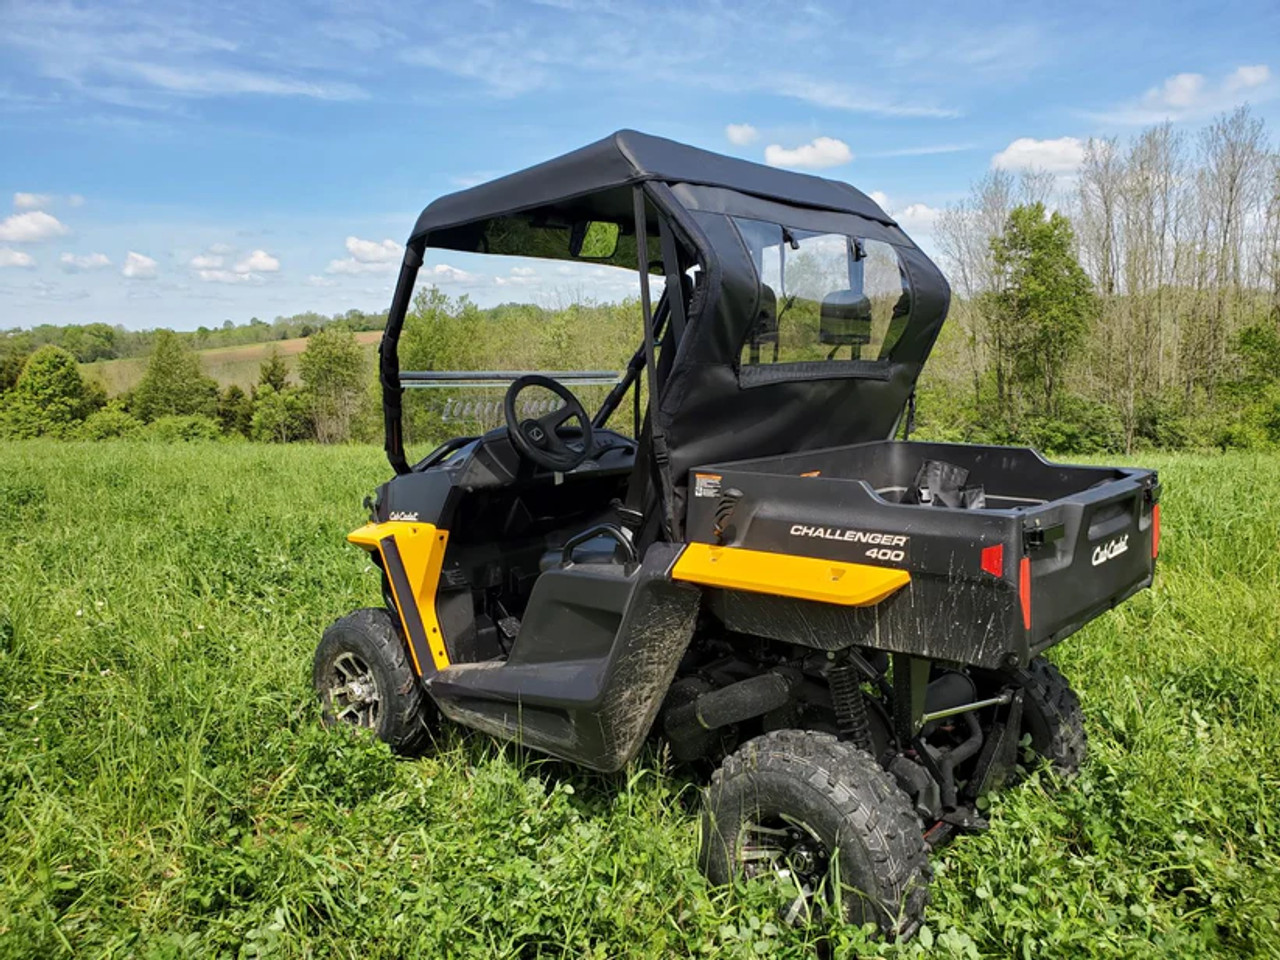 3 Star side x side Cub Cadet Challenger 400 doors and rear window